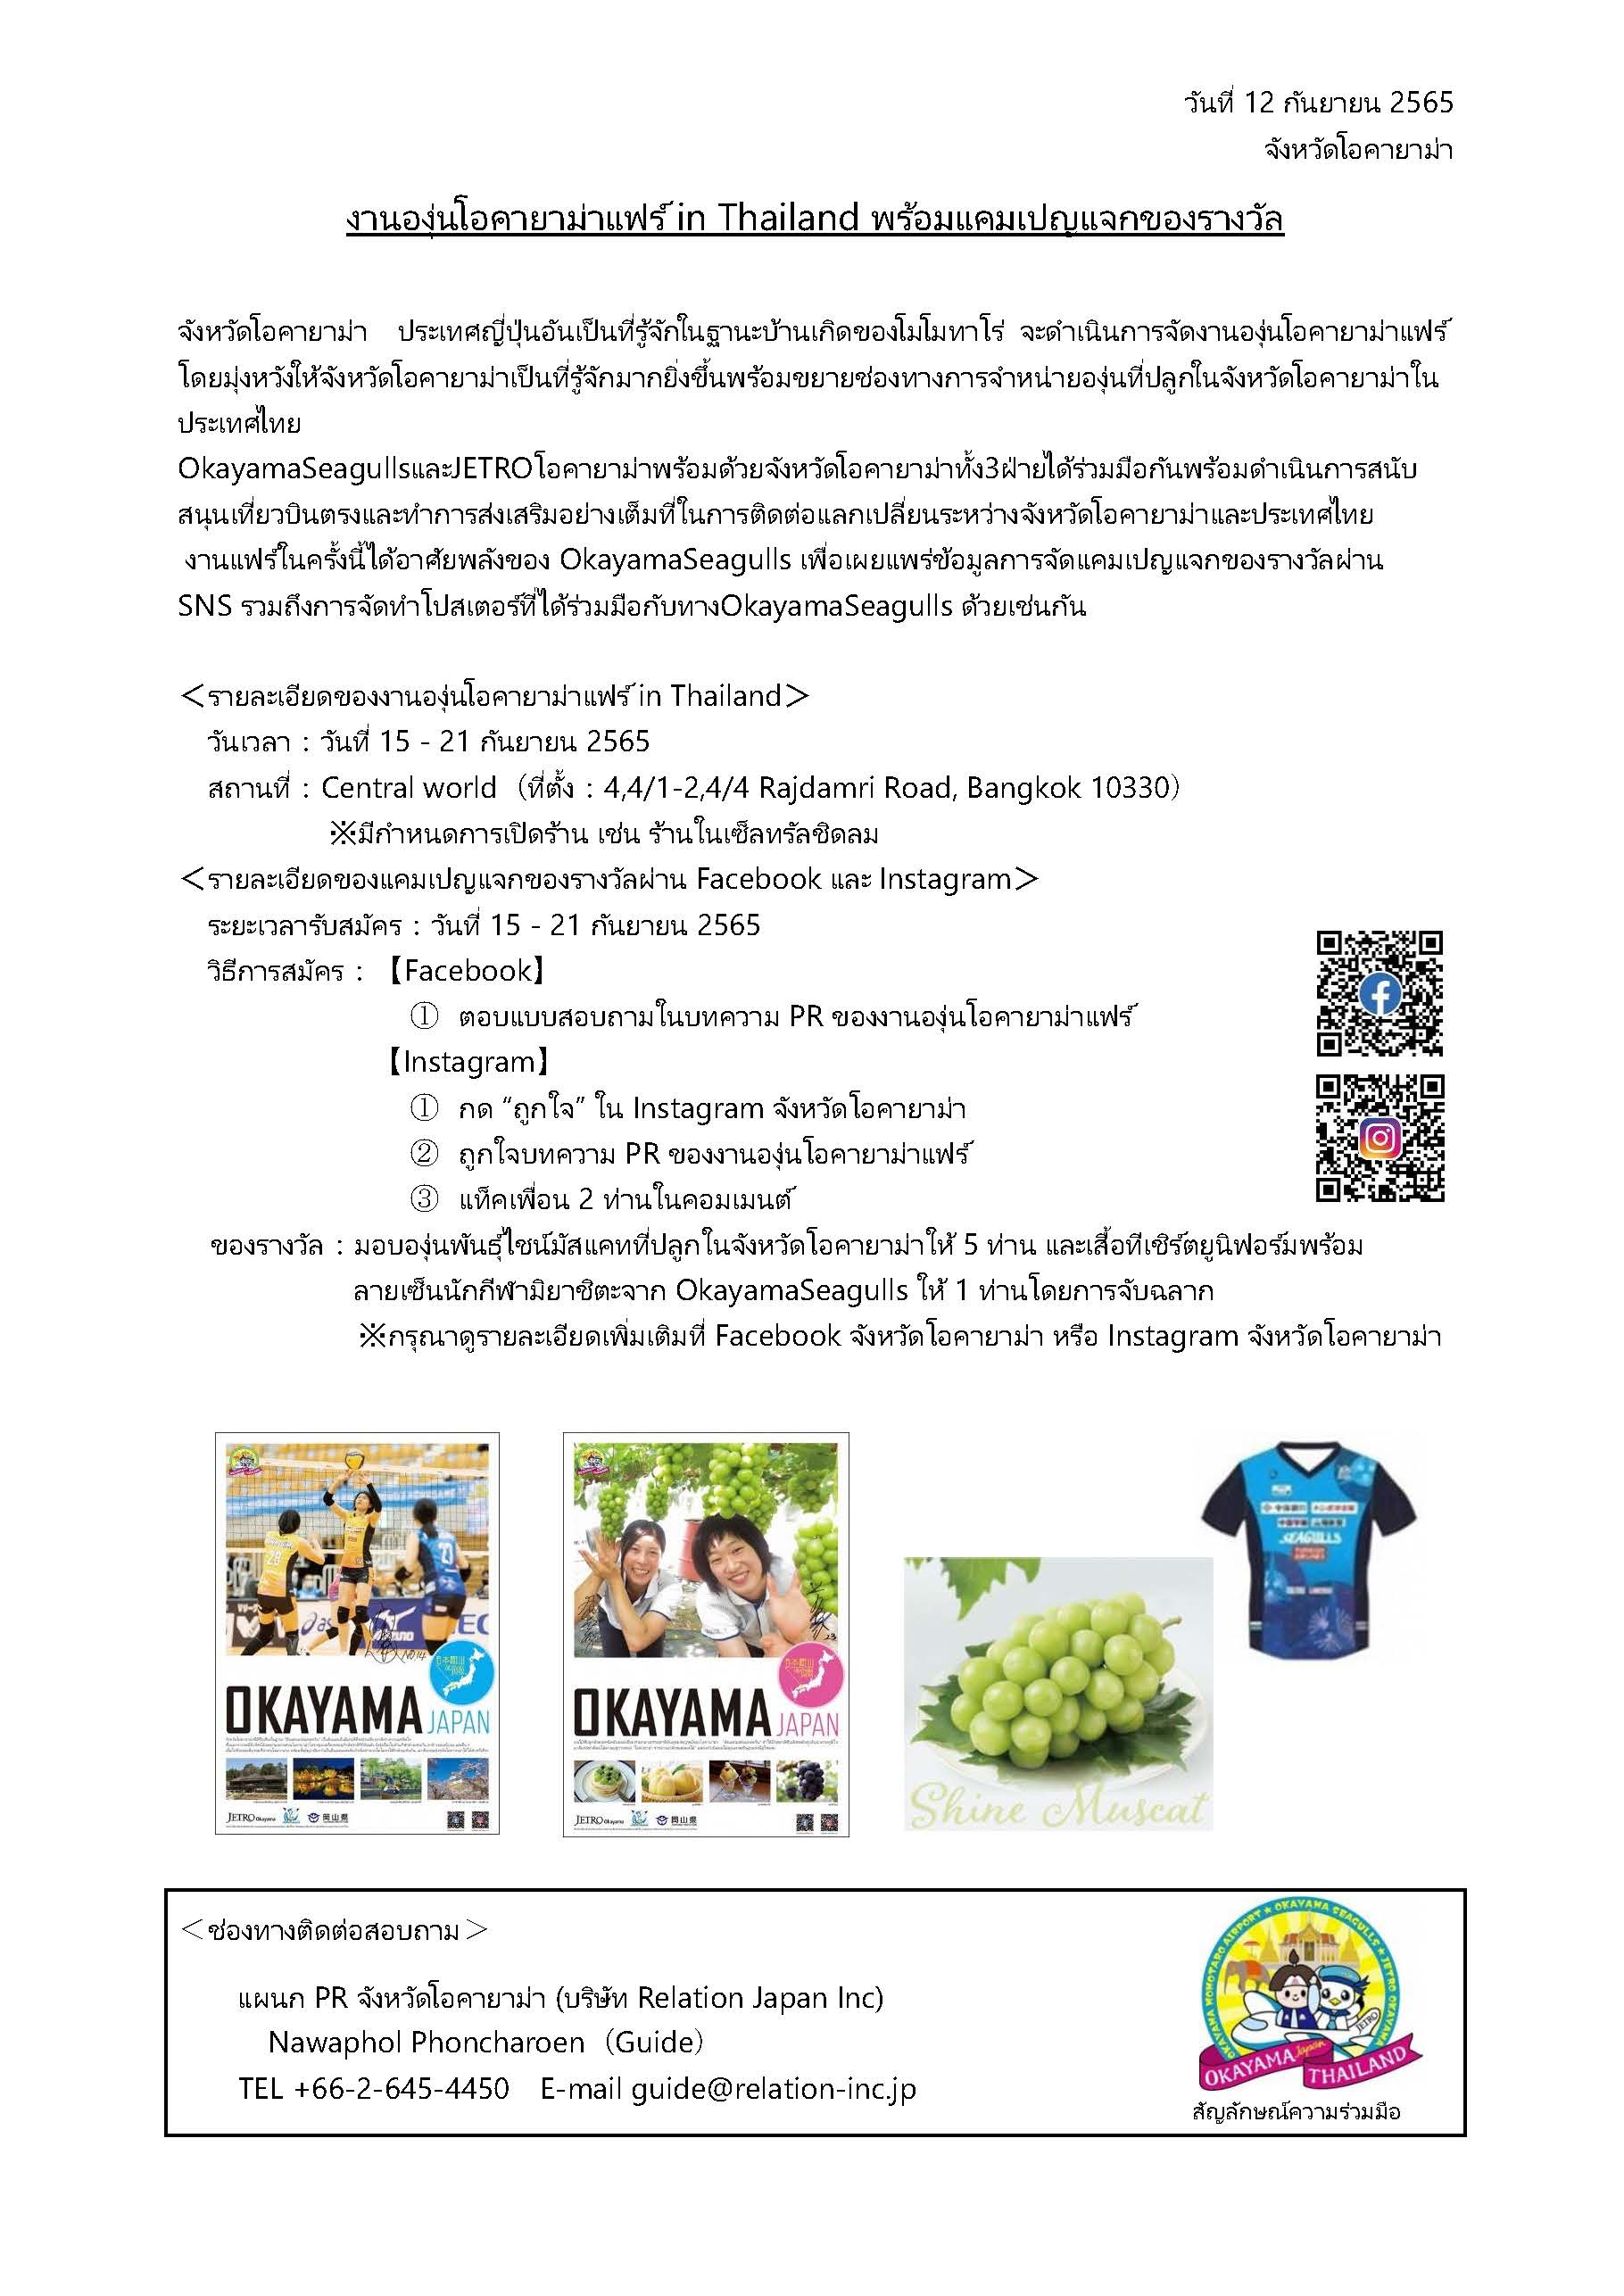 Okayama_Grapes_Fair_Event_in_Thailand_Sep_2022_Page_1